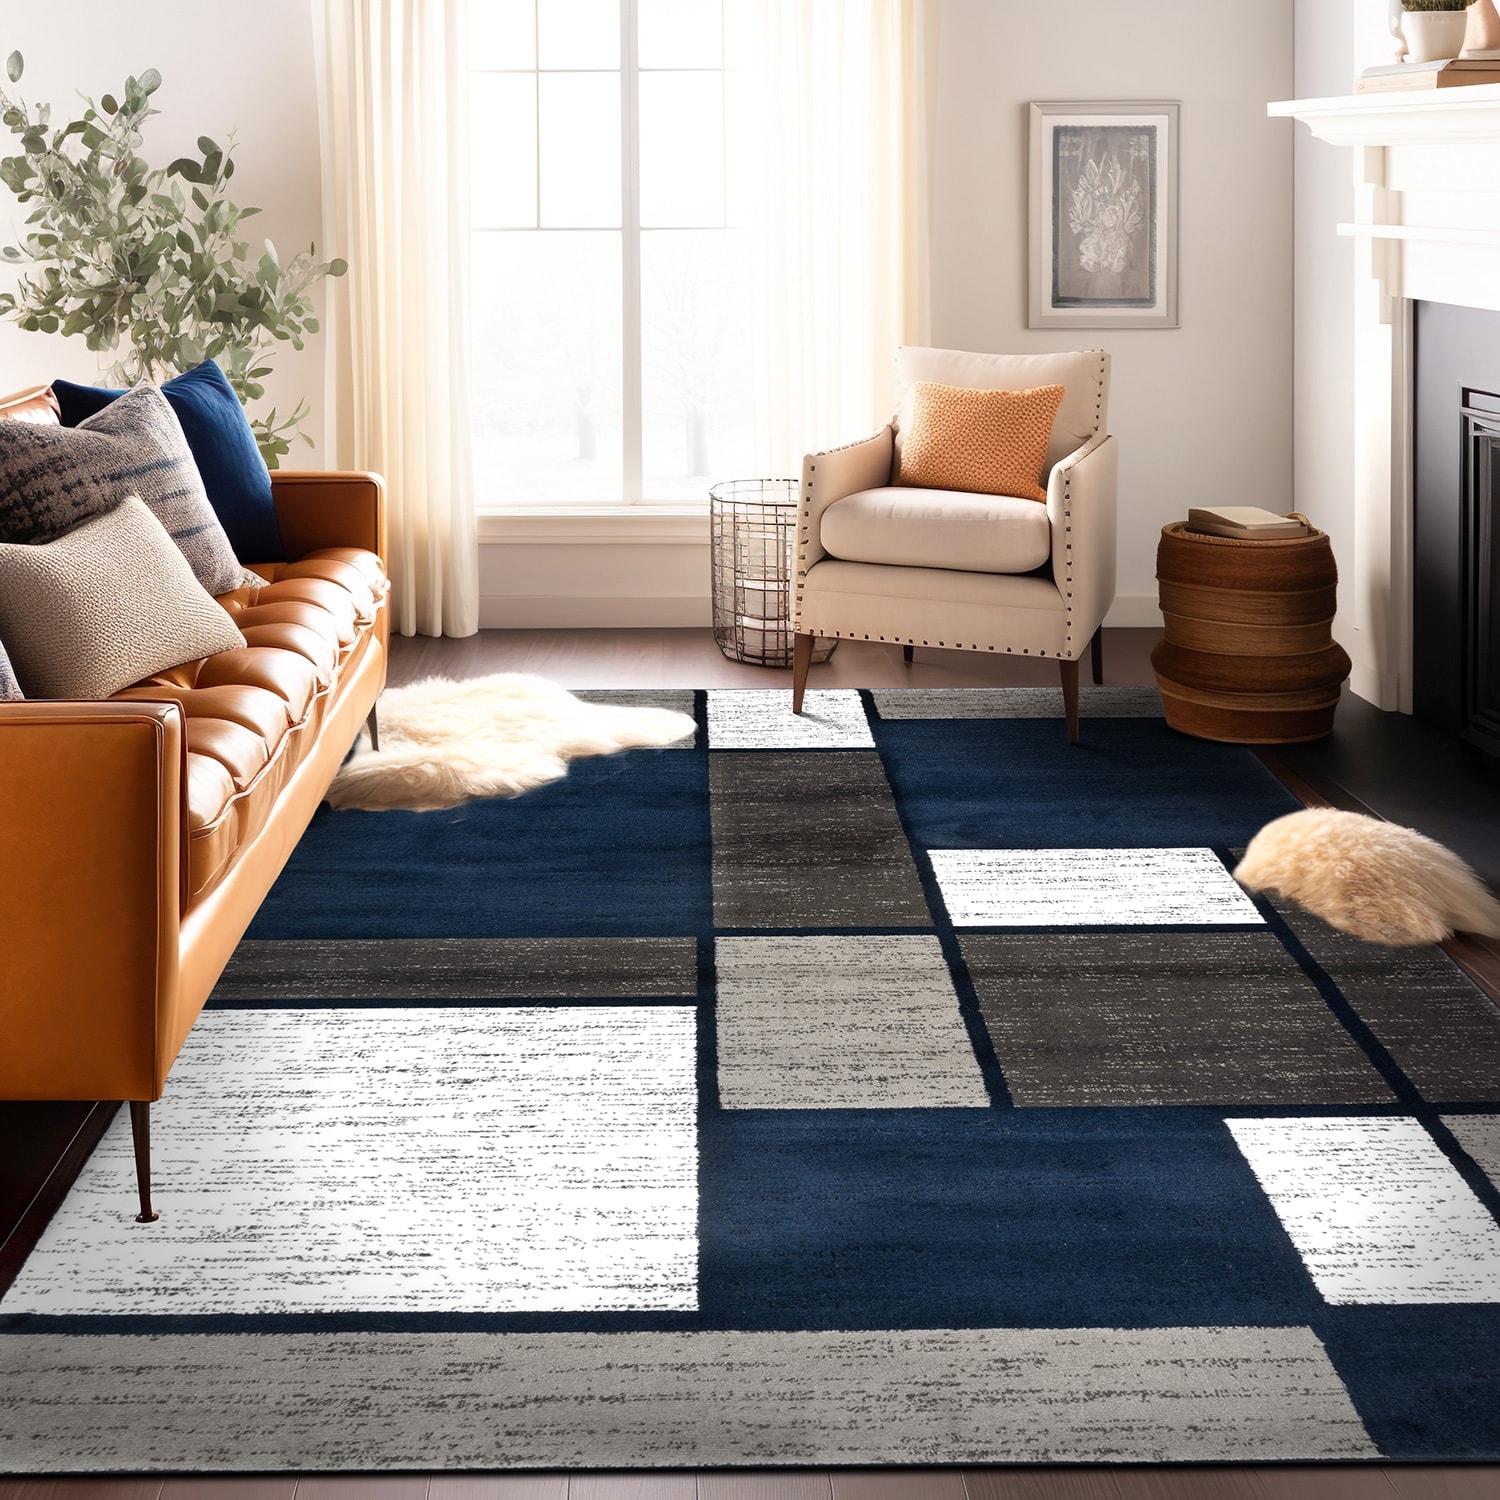 https://ak1.ostkcdn.com/images/products/is/images/direct/40cc0aa77877205daed267facdaa31a9dc211c93/World-Rug-Gallery-Contemporary-Modern-Boxed-Color-Block-Area-Rug.jpg